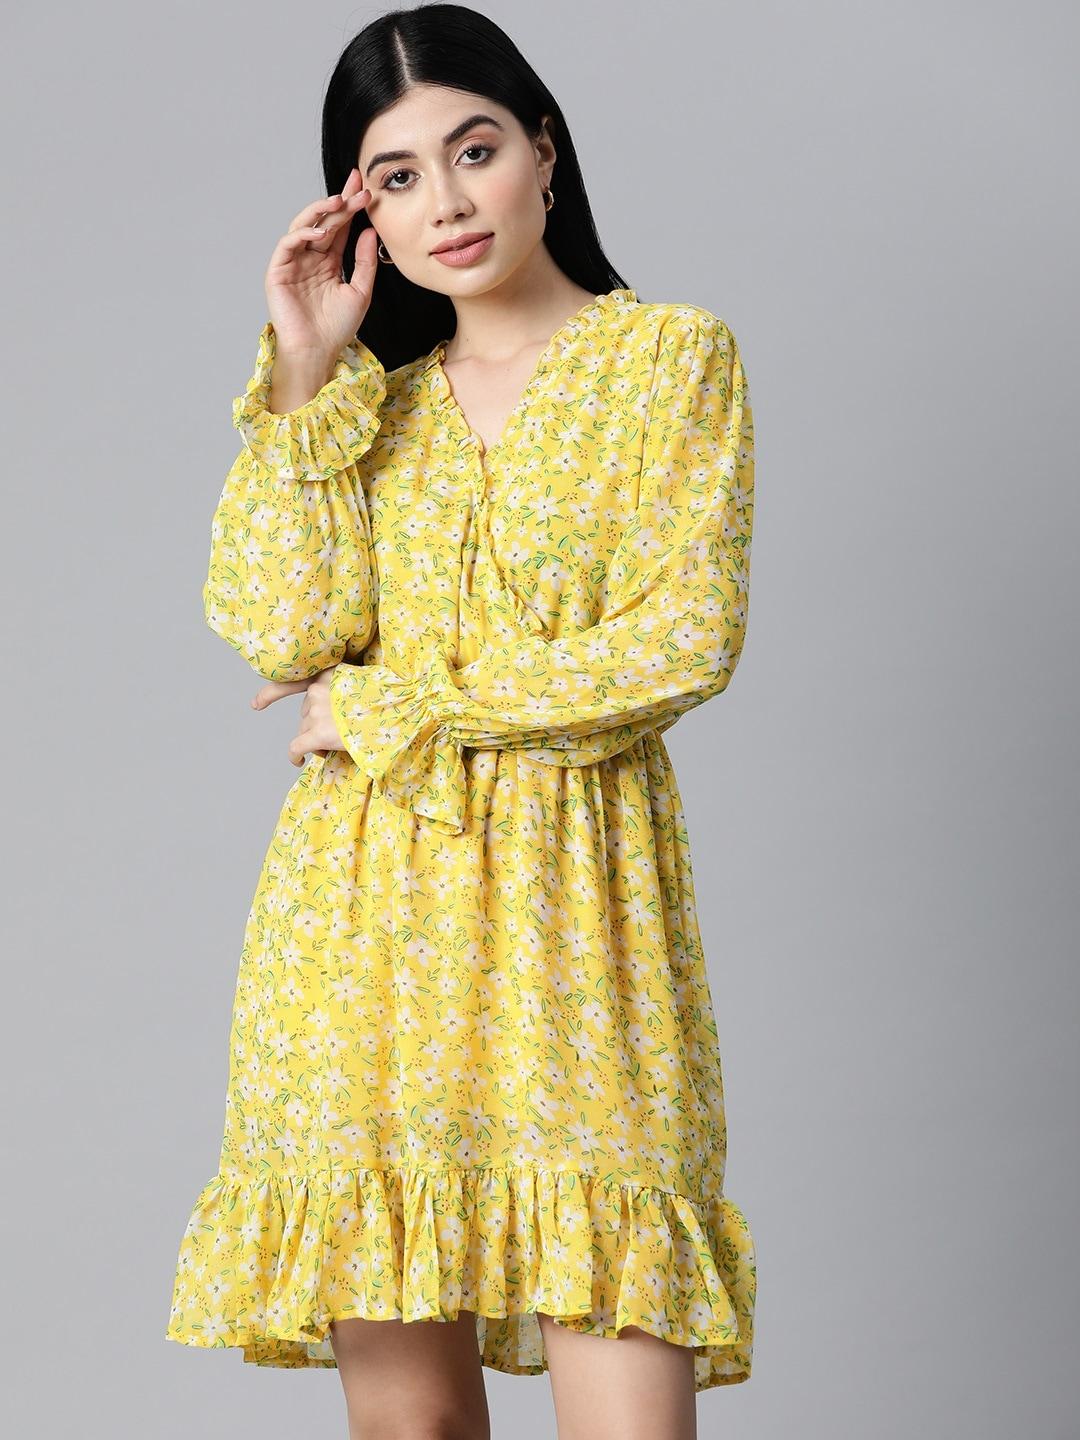 pluss-women-yellow-&-white-floral-printed-bell-sleeves-dress-with-ruffle-detail